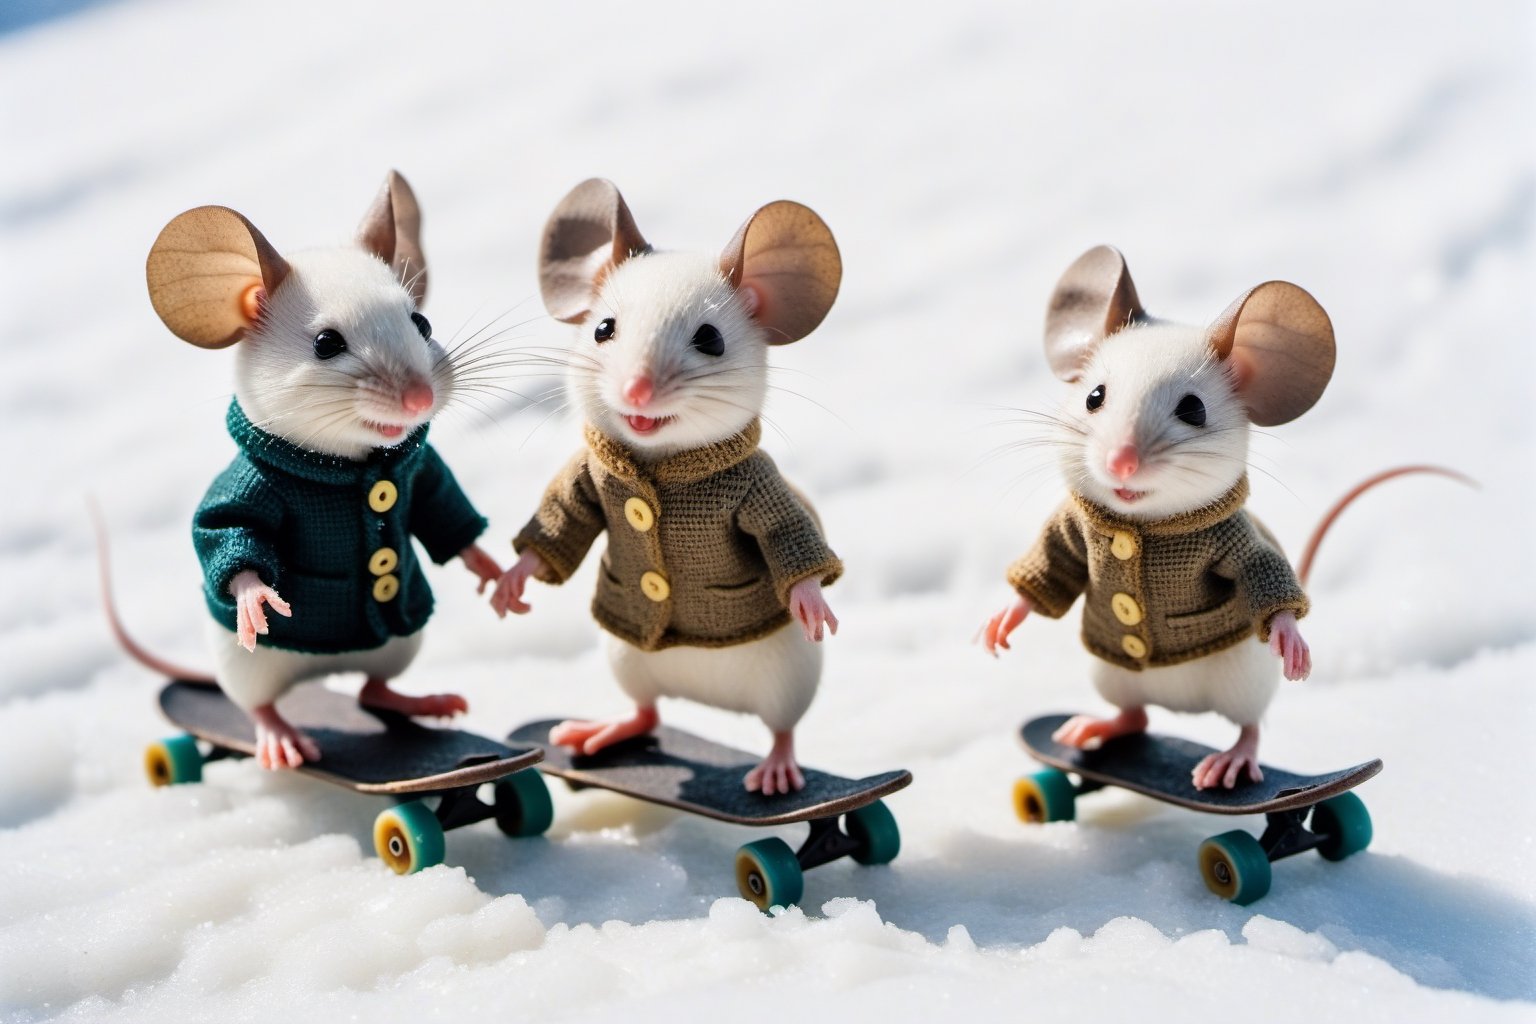 Vintage old photograph of two cute little mice made of rice skating in the snow. Canon 5d Mark 4, Kodak Ektar, 